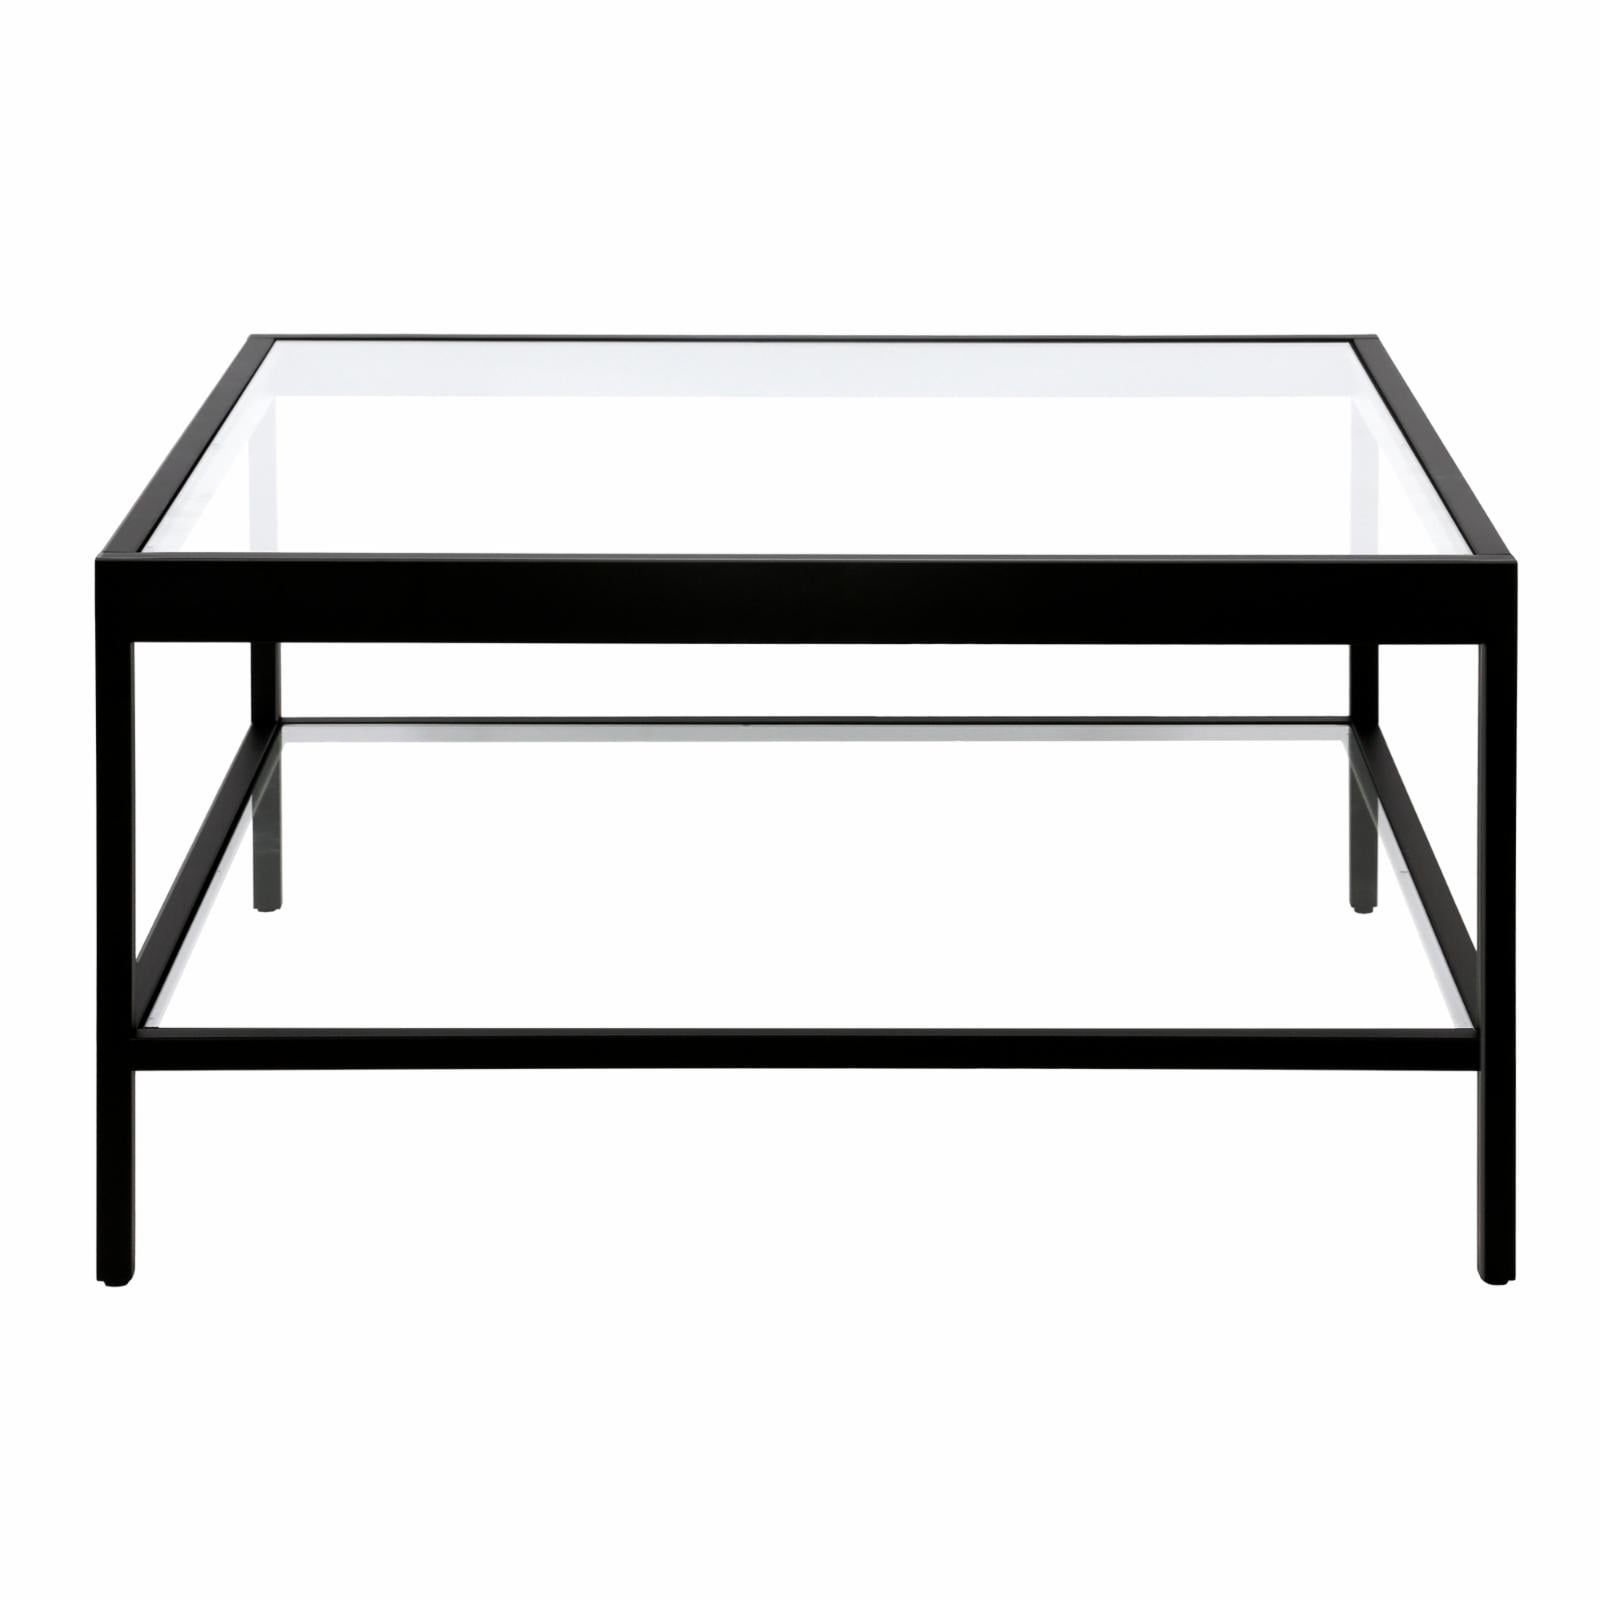 Addison&lane Alexis Square Coffee Table – Walmart For Addison&amp;lane Calix Square Tables (View 8 of 15)